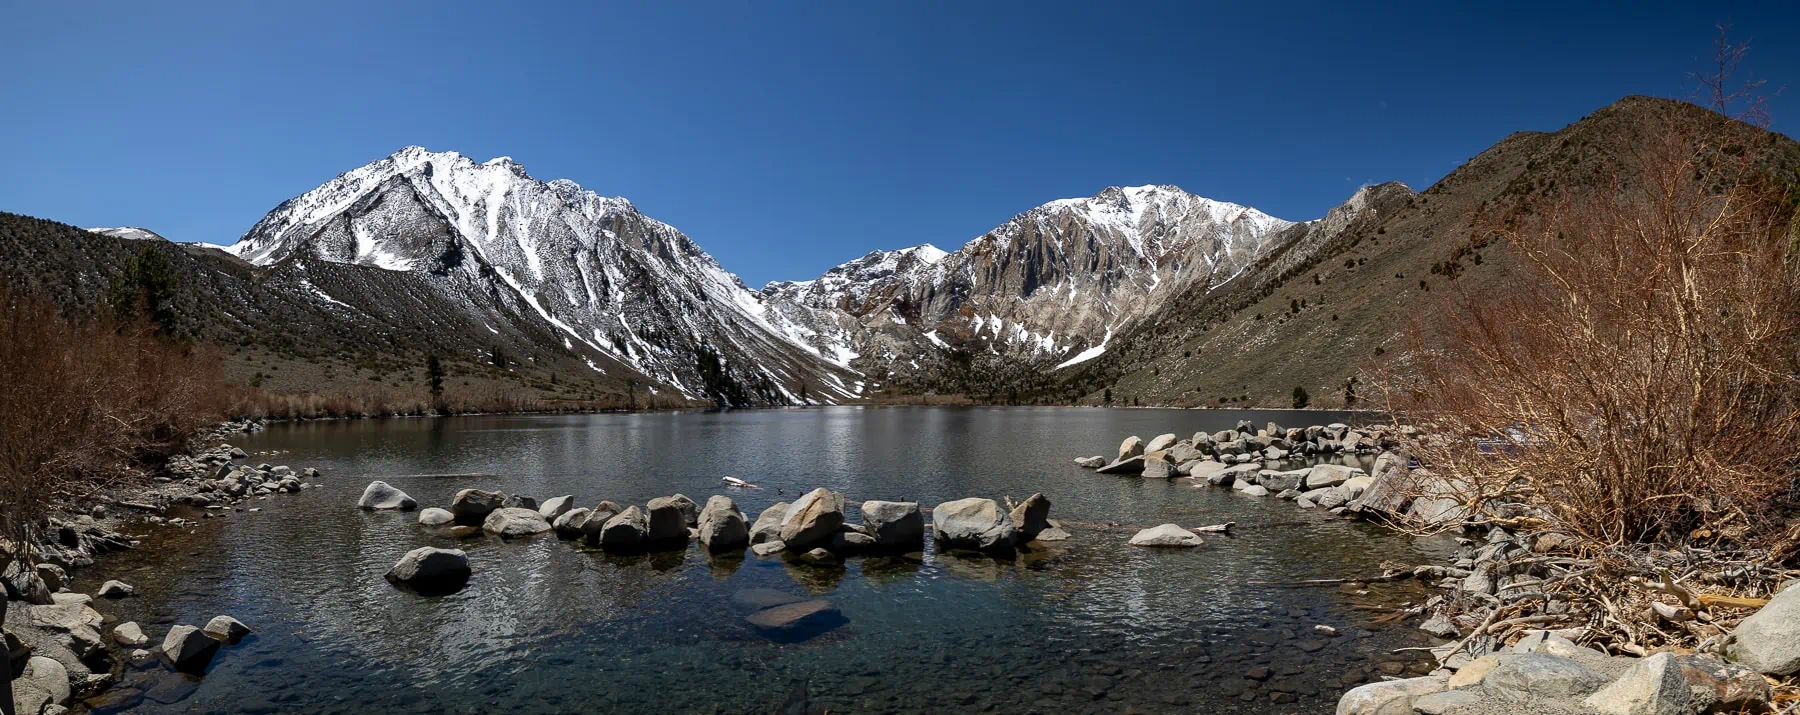 Convict Lake with fresh snow in April.